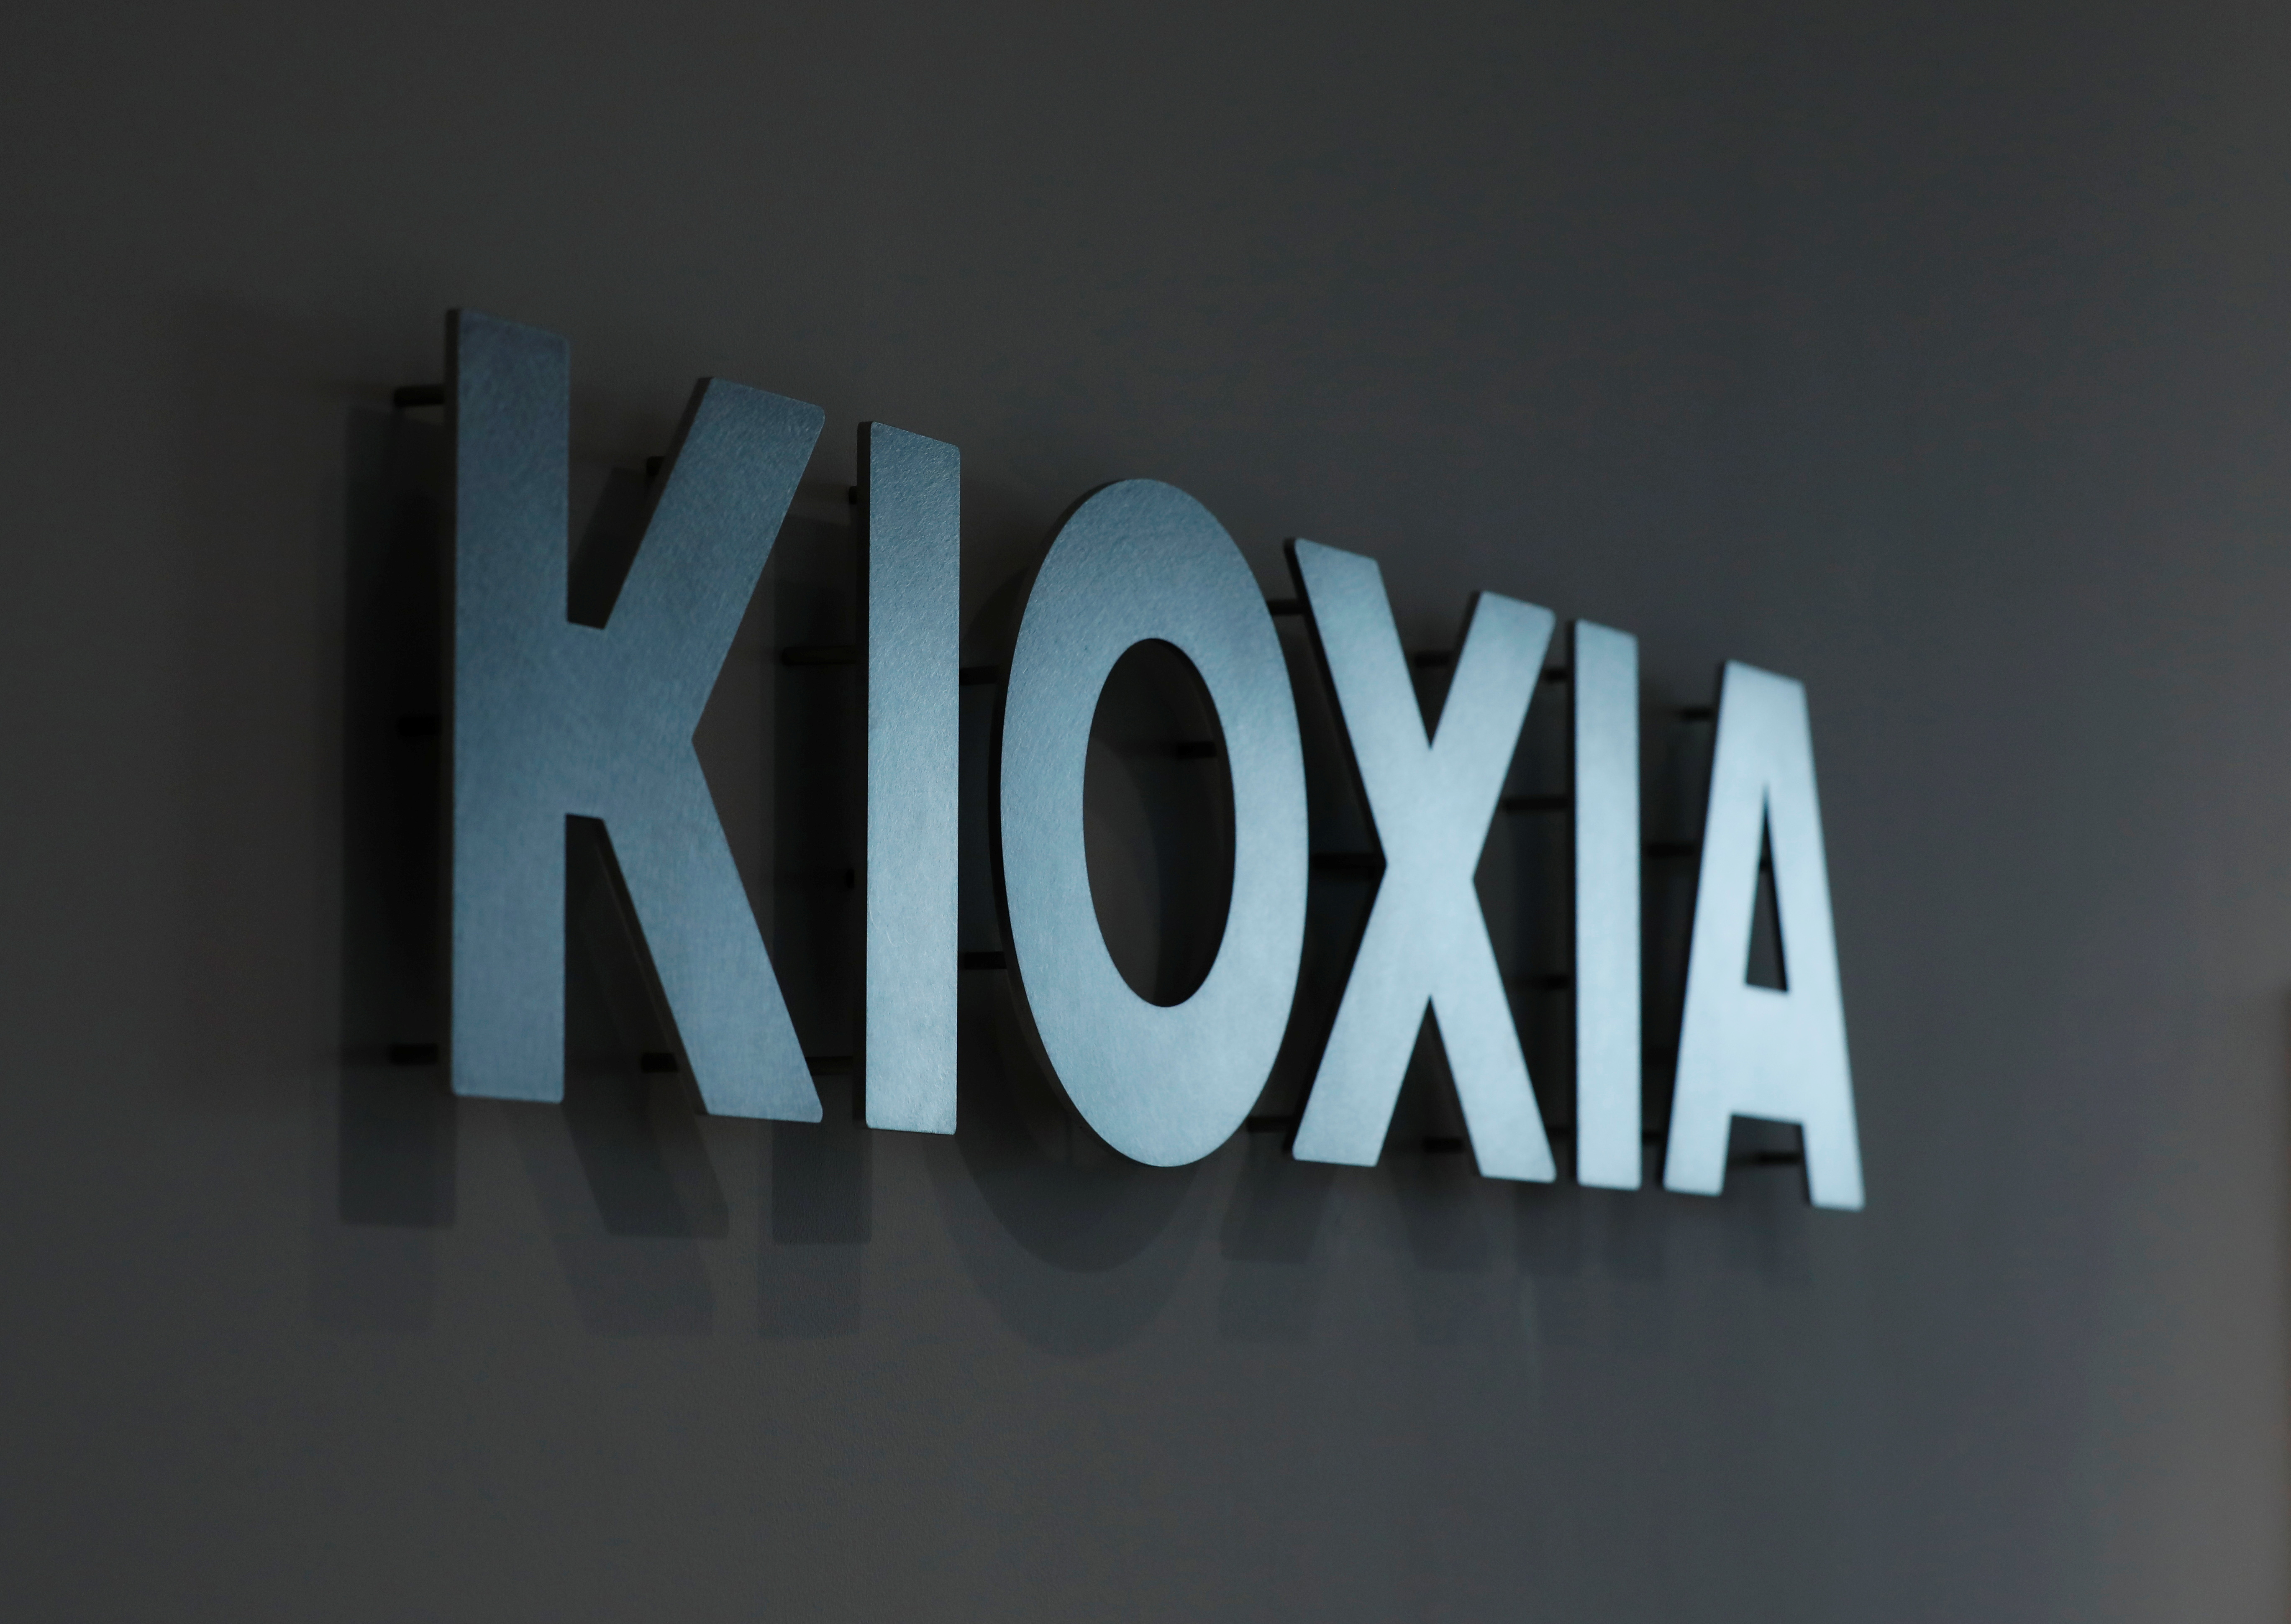 Japanese chipmaker Kioxia's logo is displayed at its headquarters in Tokyo